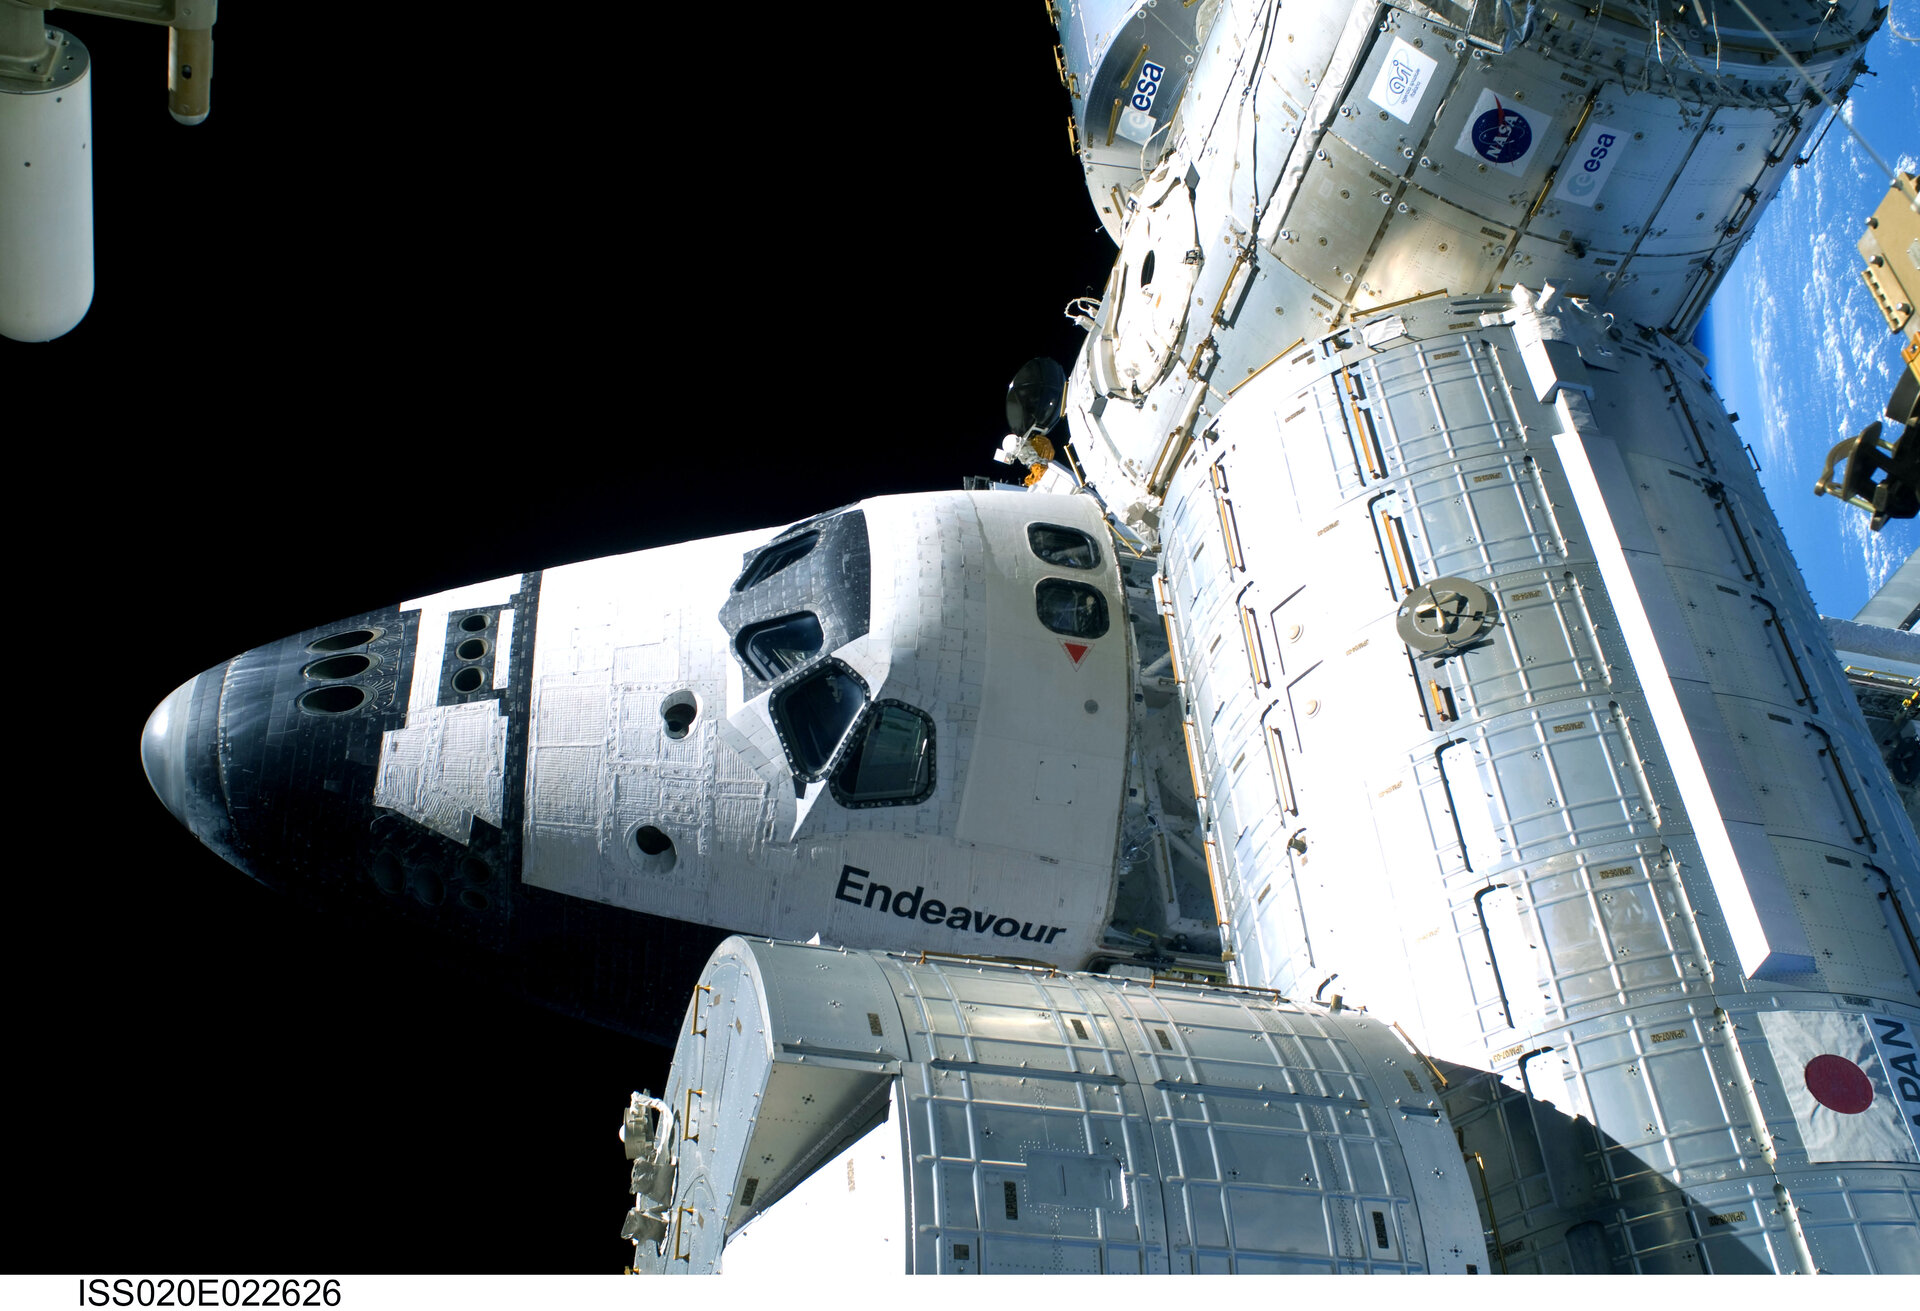 Space Shuttle Endeavour is docked with the ISS during STS-127